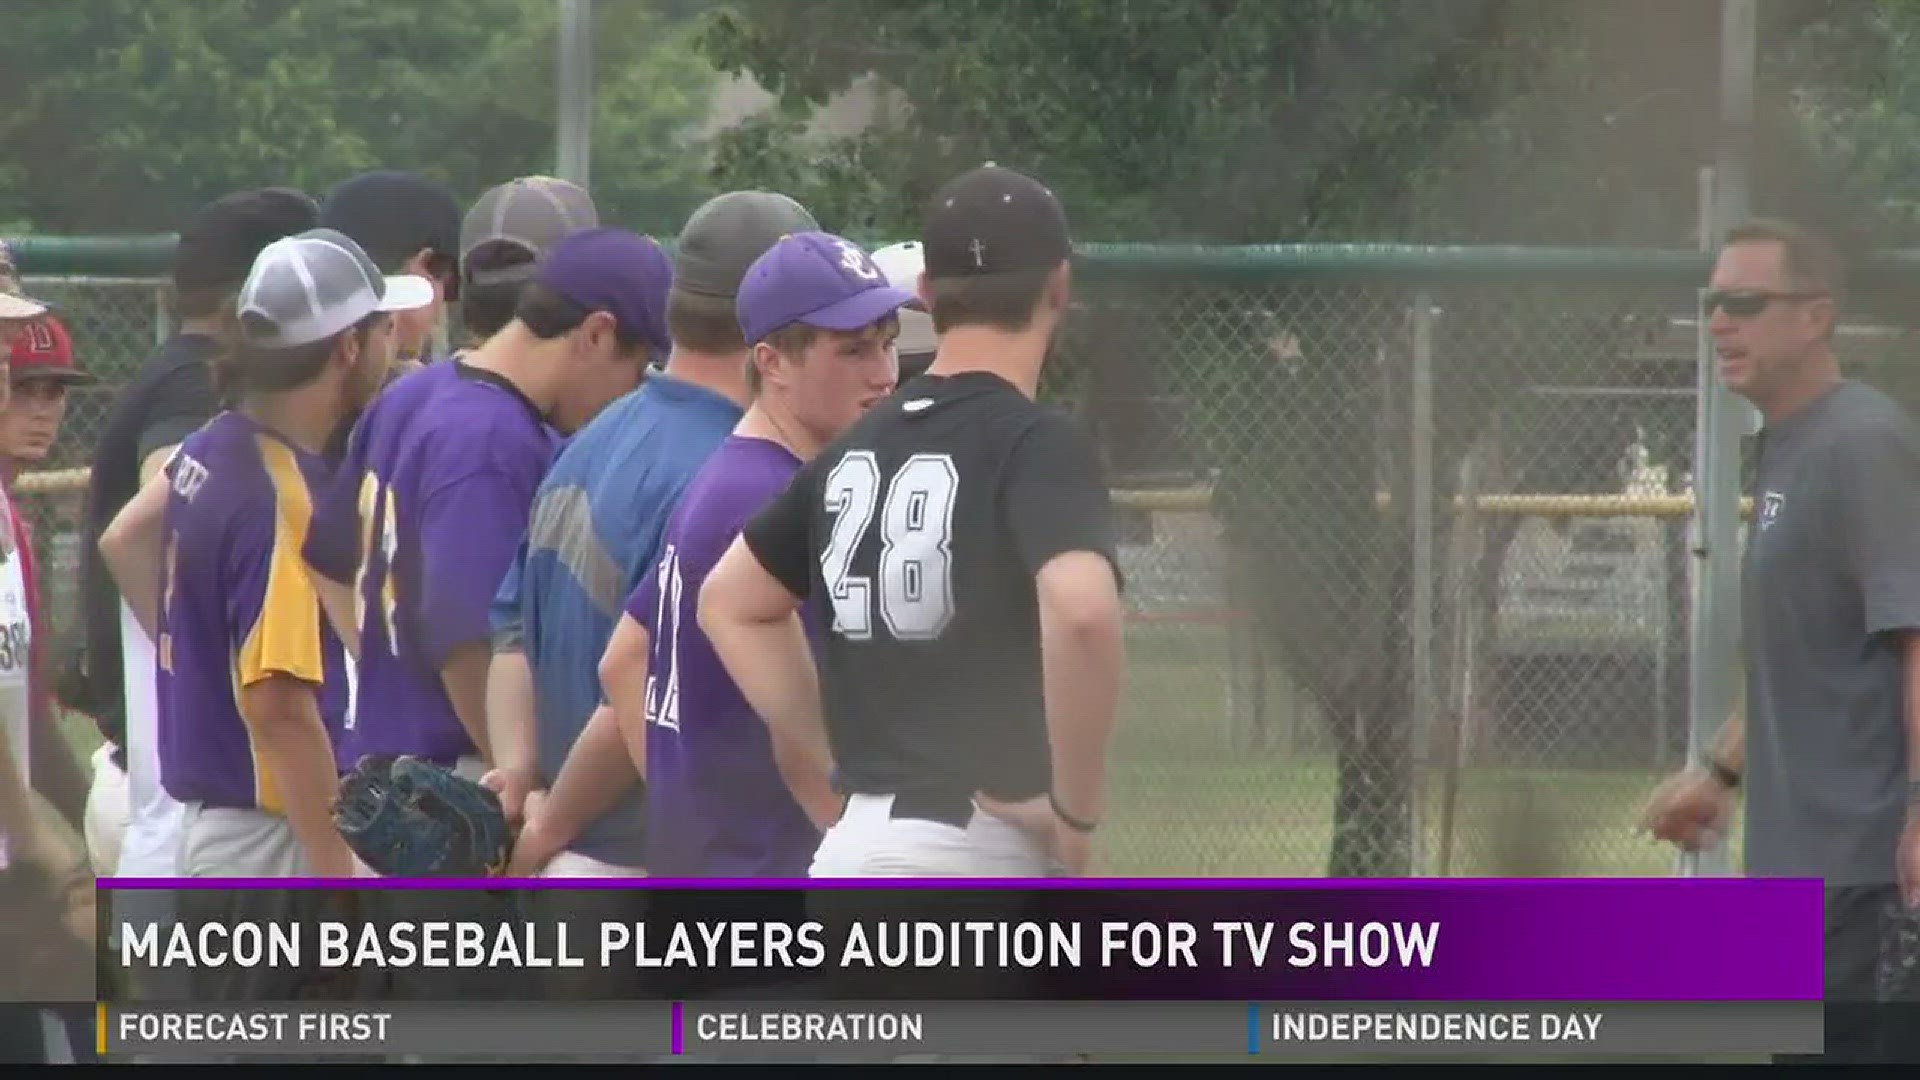 Macon baseball players audition for TV show